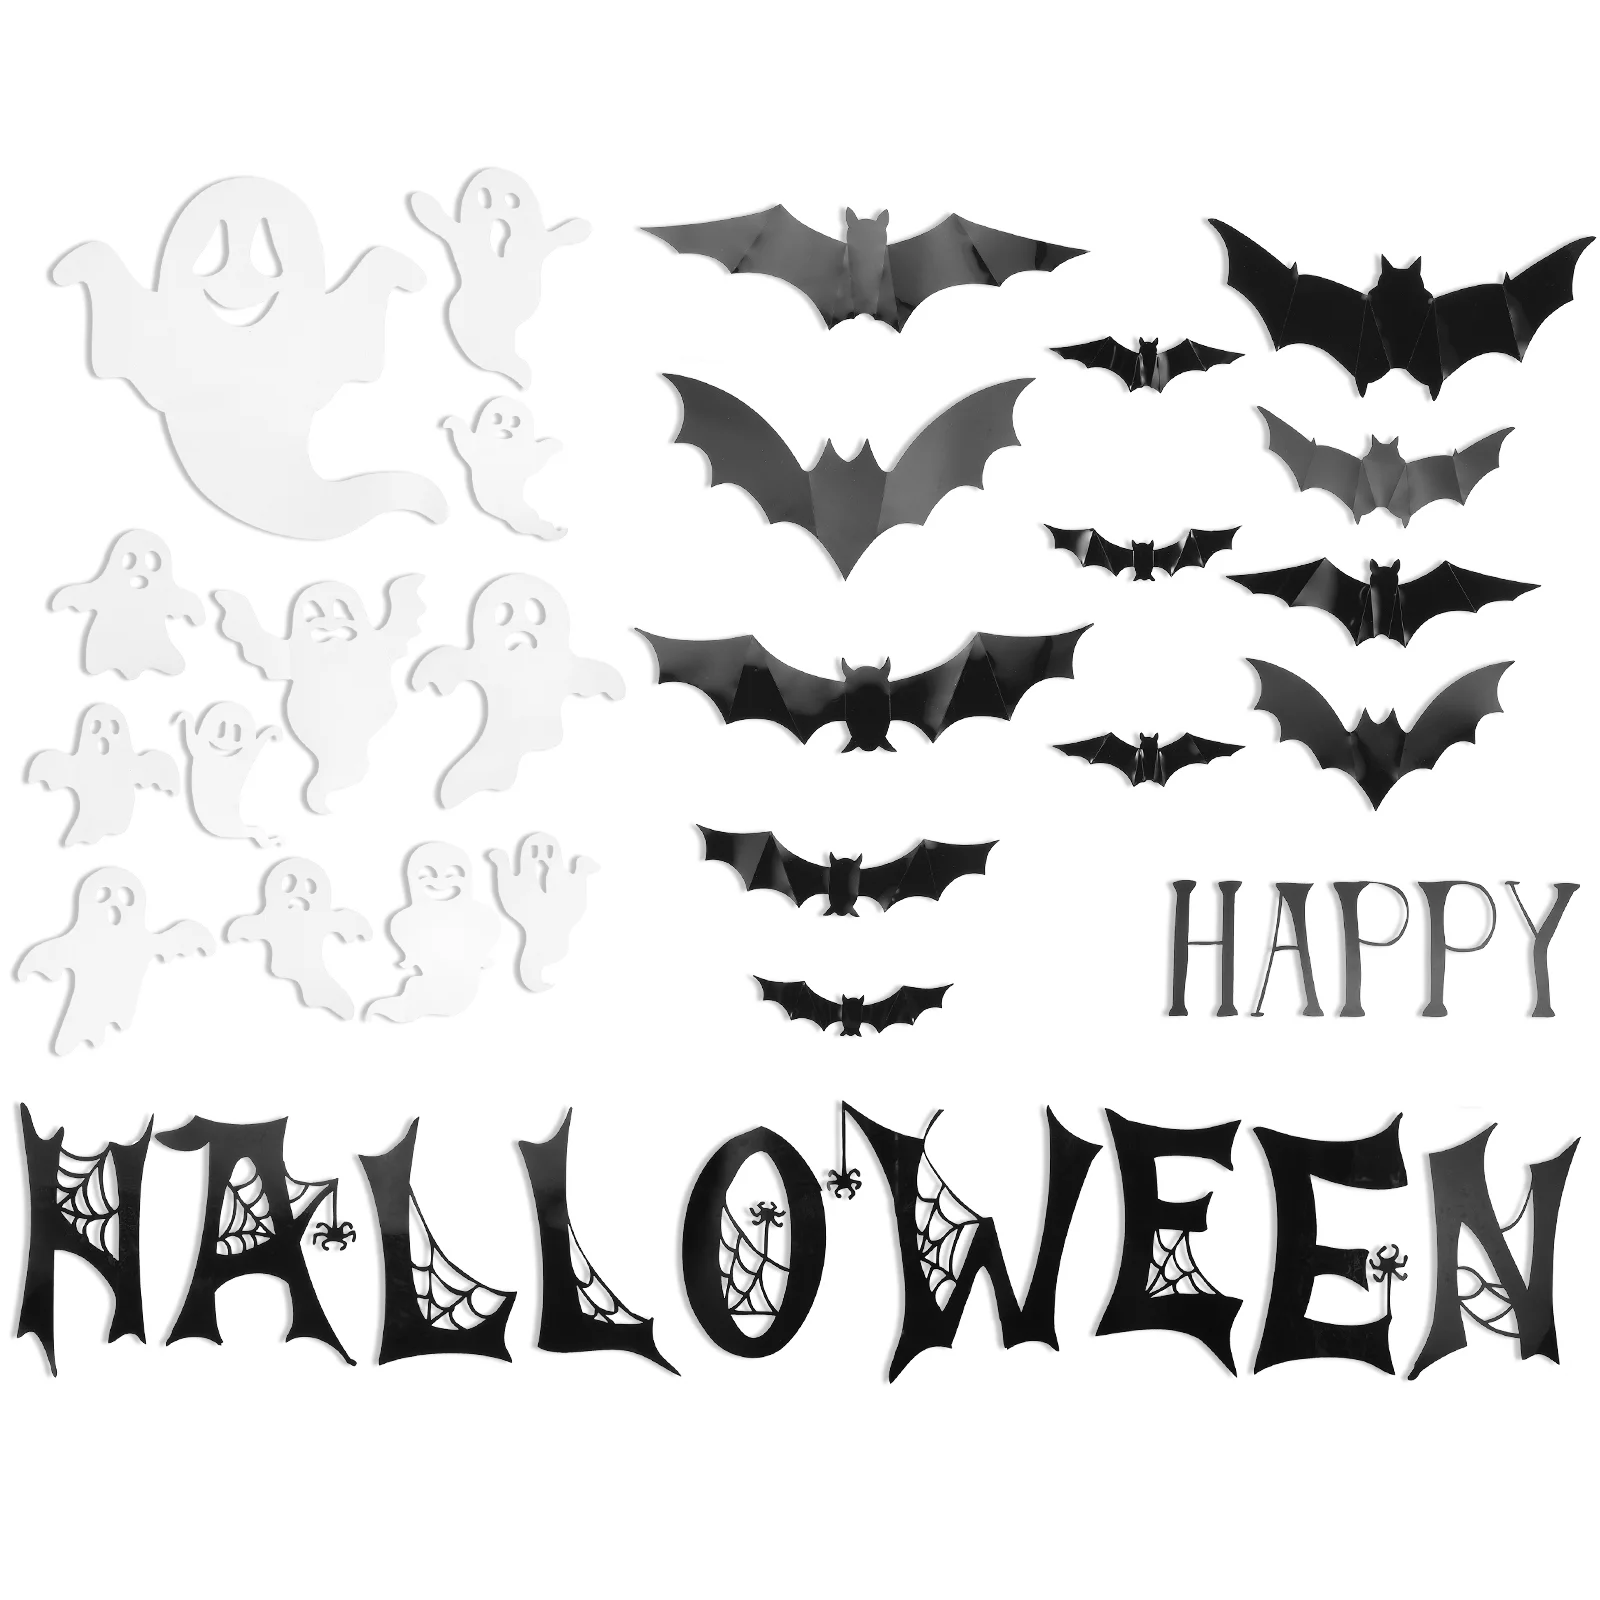 

Wall Stickers Bat Decals 3D Window Decor Sticker Bats Ghost Party Pvc Removable Scary Ornaments Glowing Home Decorativehorror